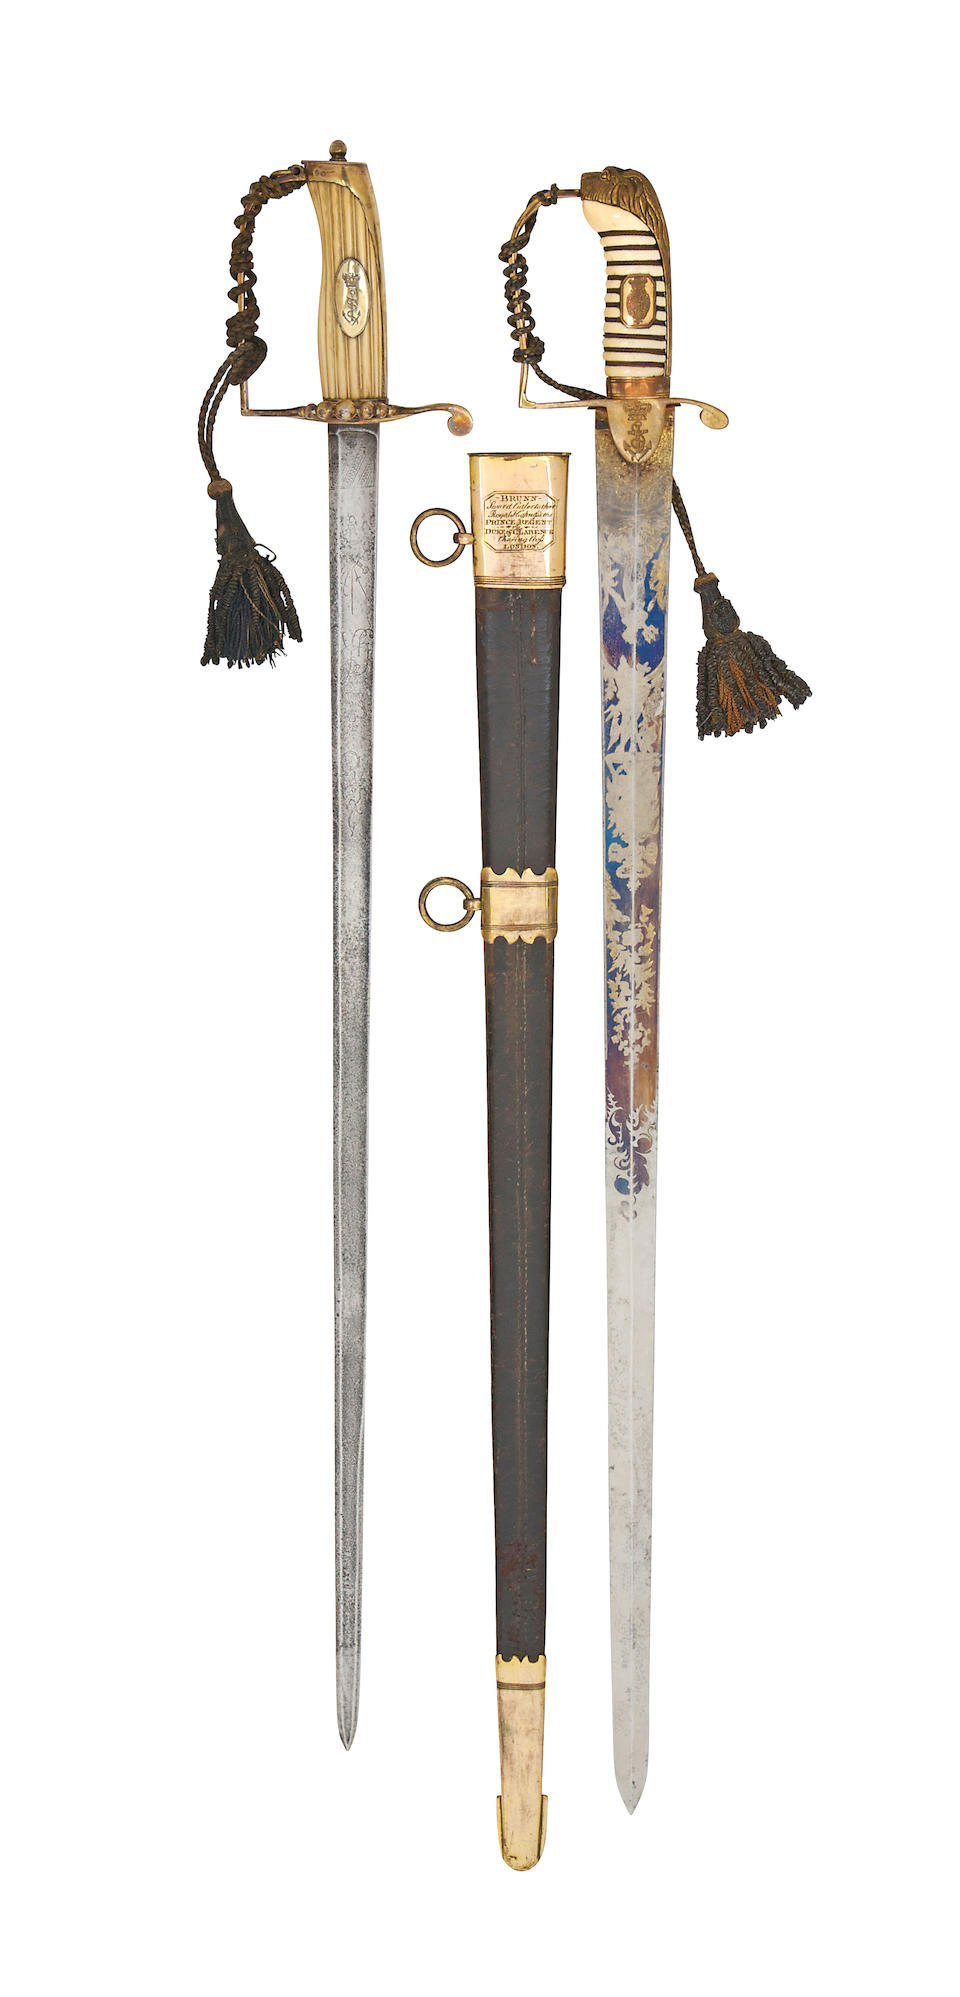 A Rare Naval Officer's Spadroon With Five-Ball Silver-Gilt Hilt